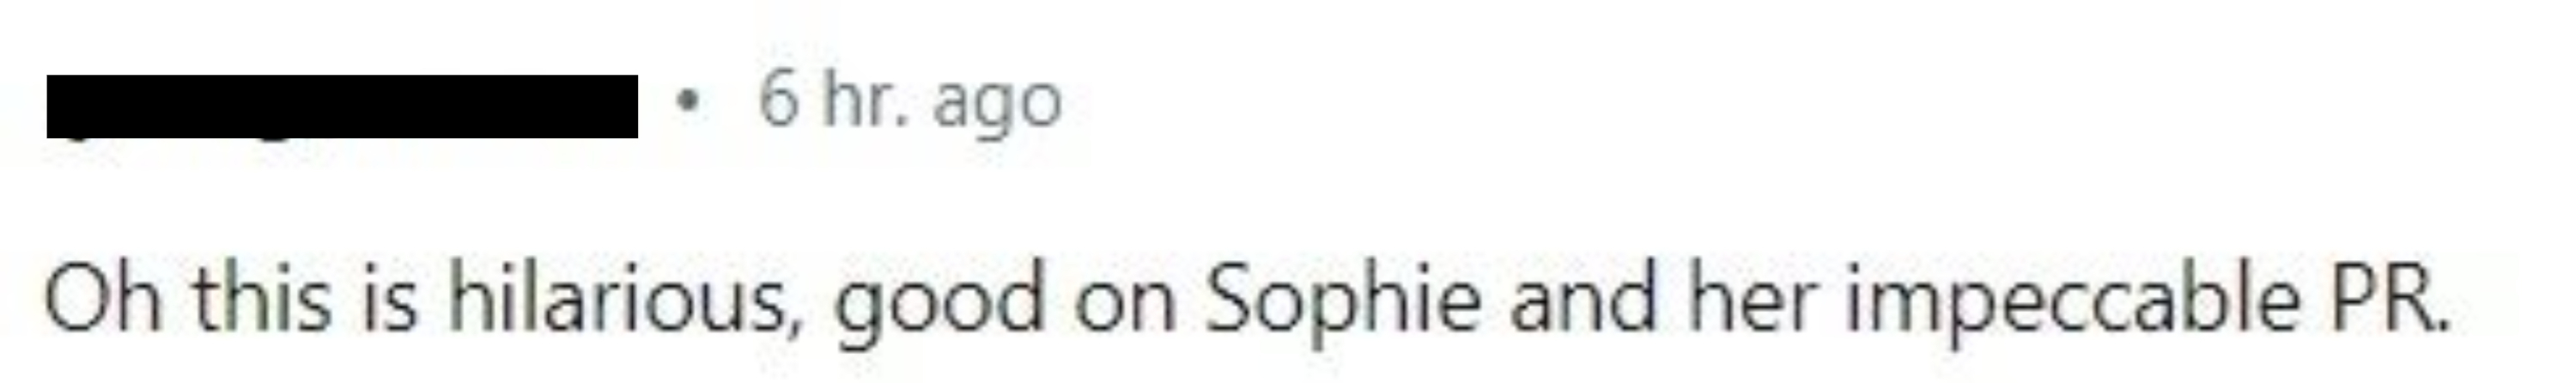 &quot;Oh this is hilarious, good on Sophie and her impeccable PR.&quot;